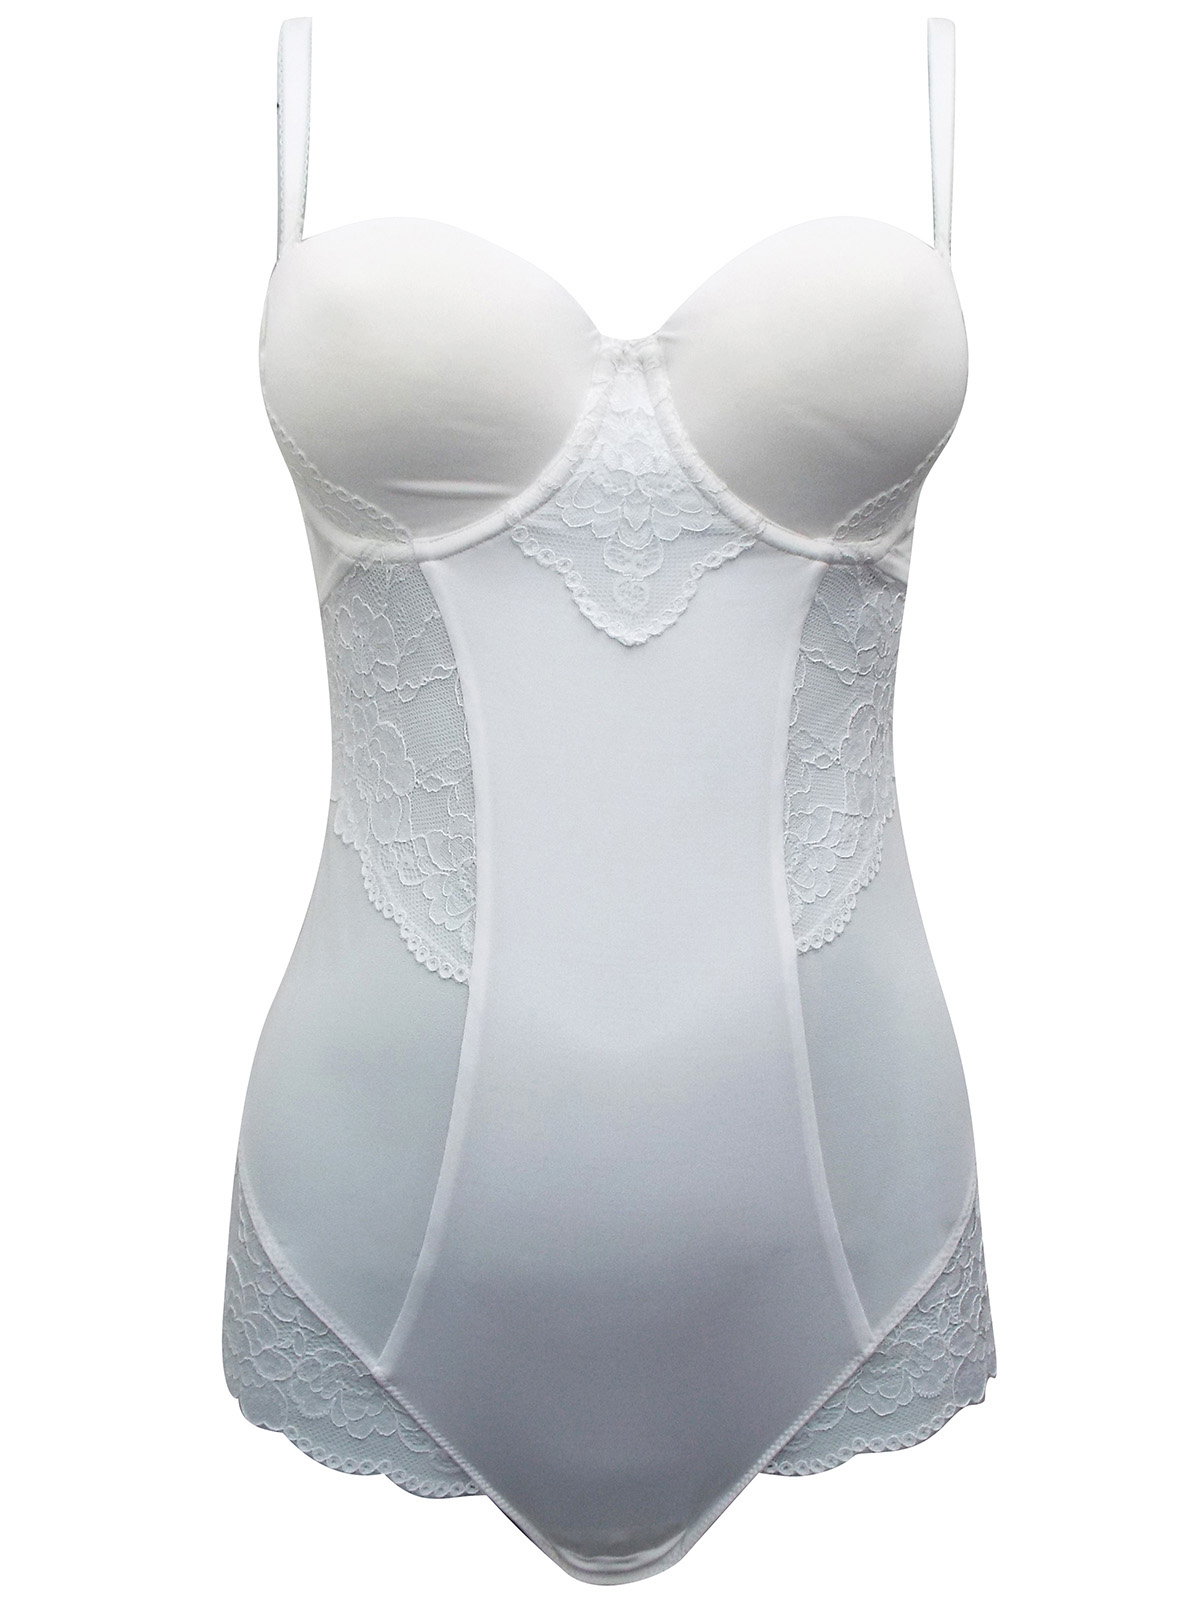 WHITE Control Cupped Lace Body - Size 34 to 38 (B-D)